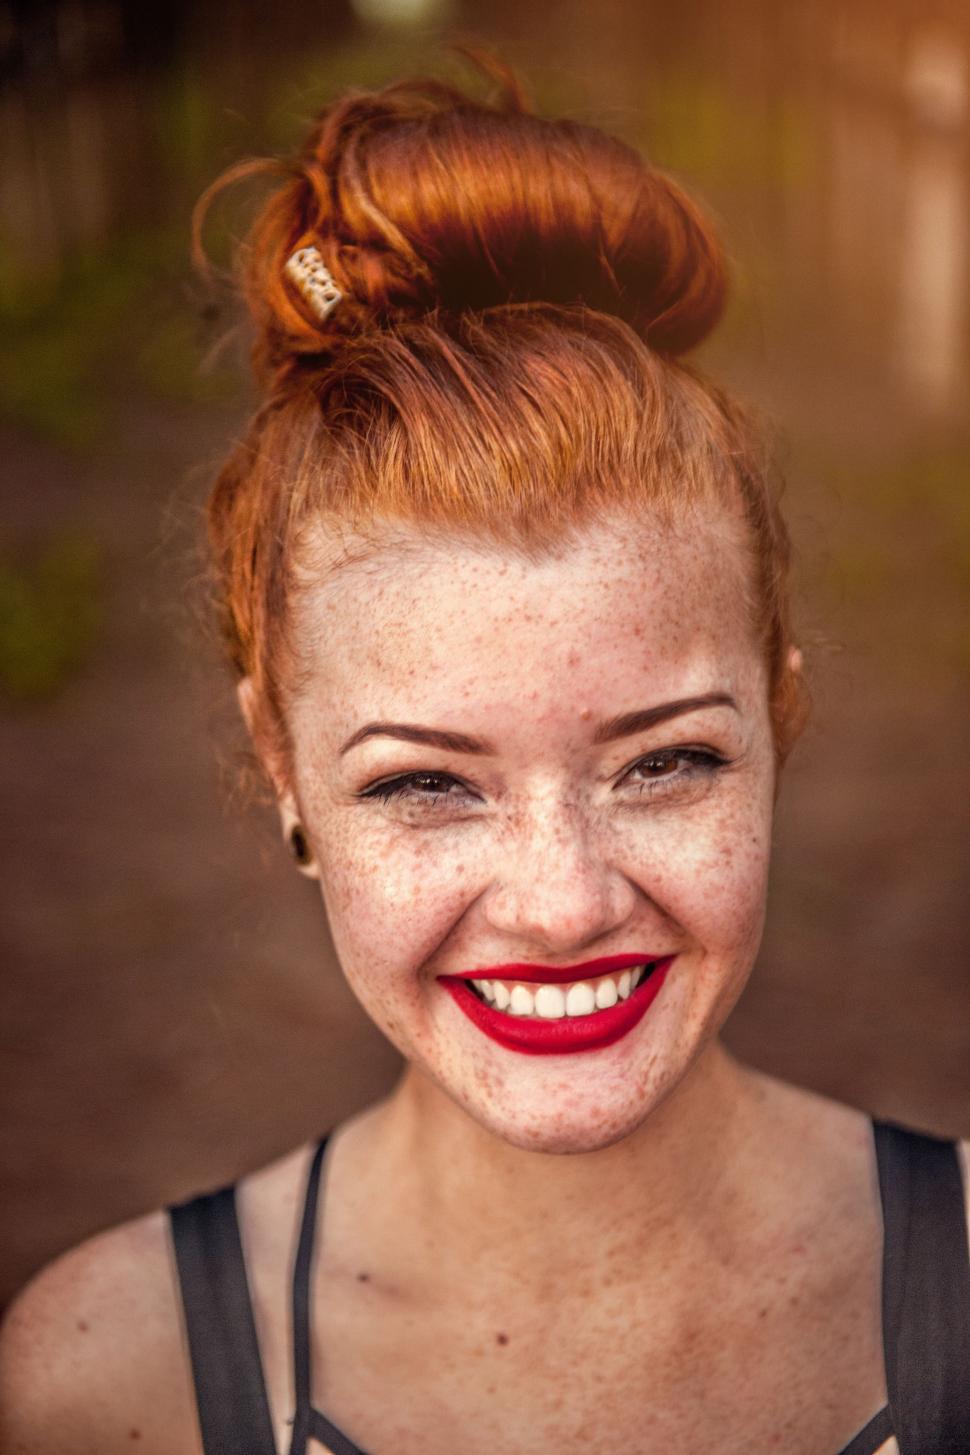 Free Image of Woman With Freckled Hair and Bow in Hair 